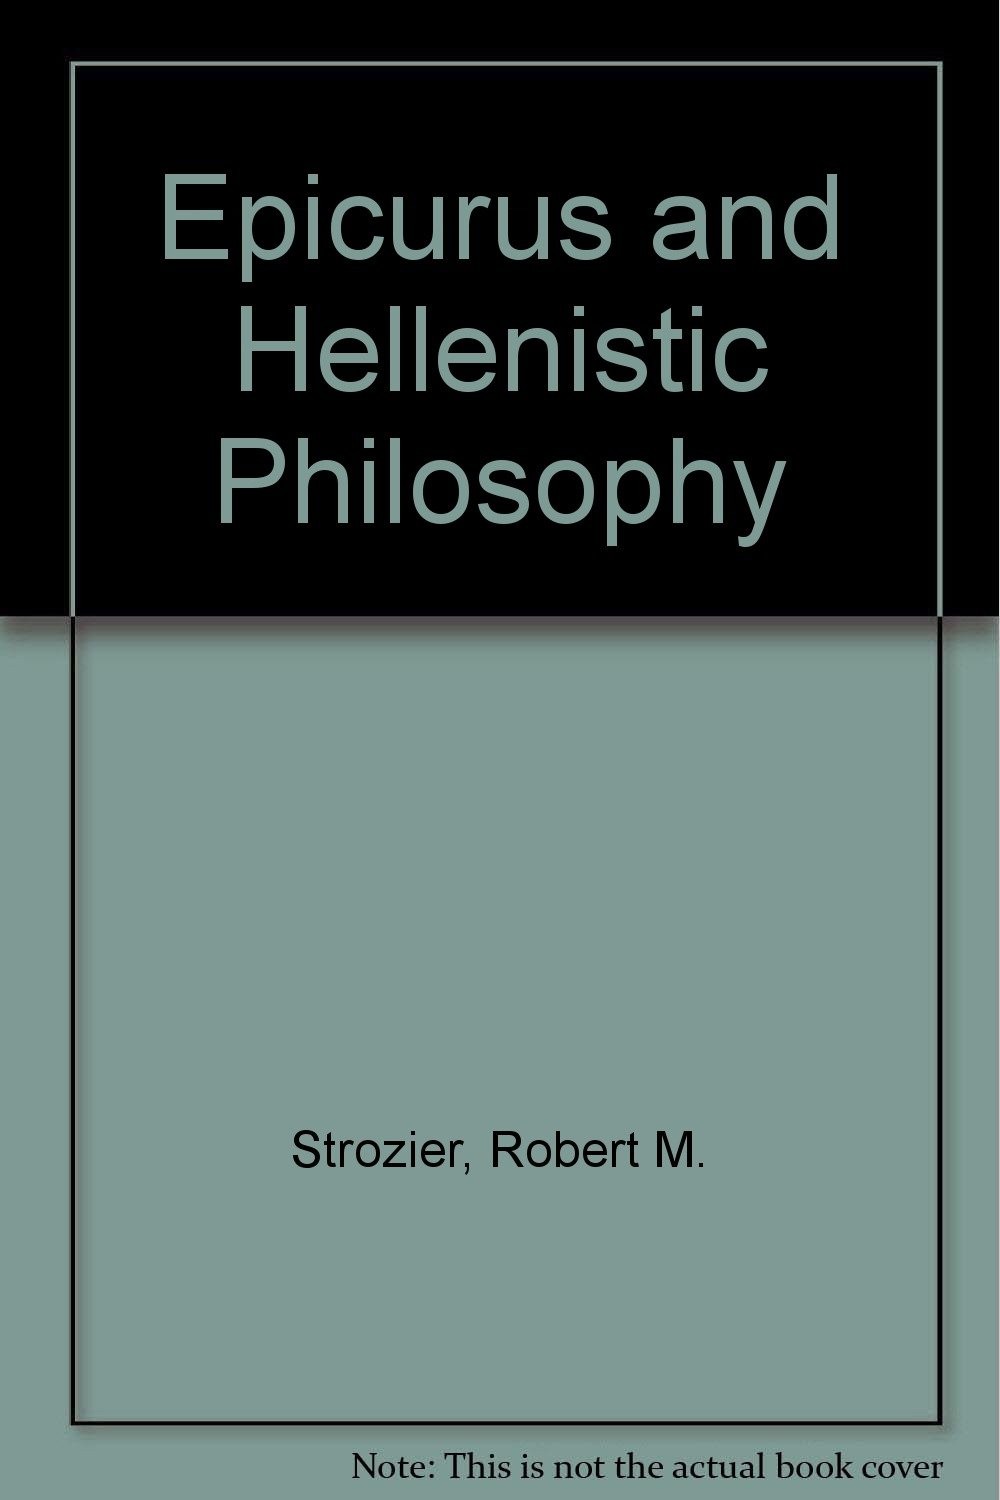 Epicurus and Hellenistic Philosophy